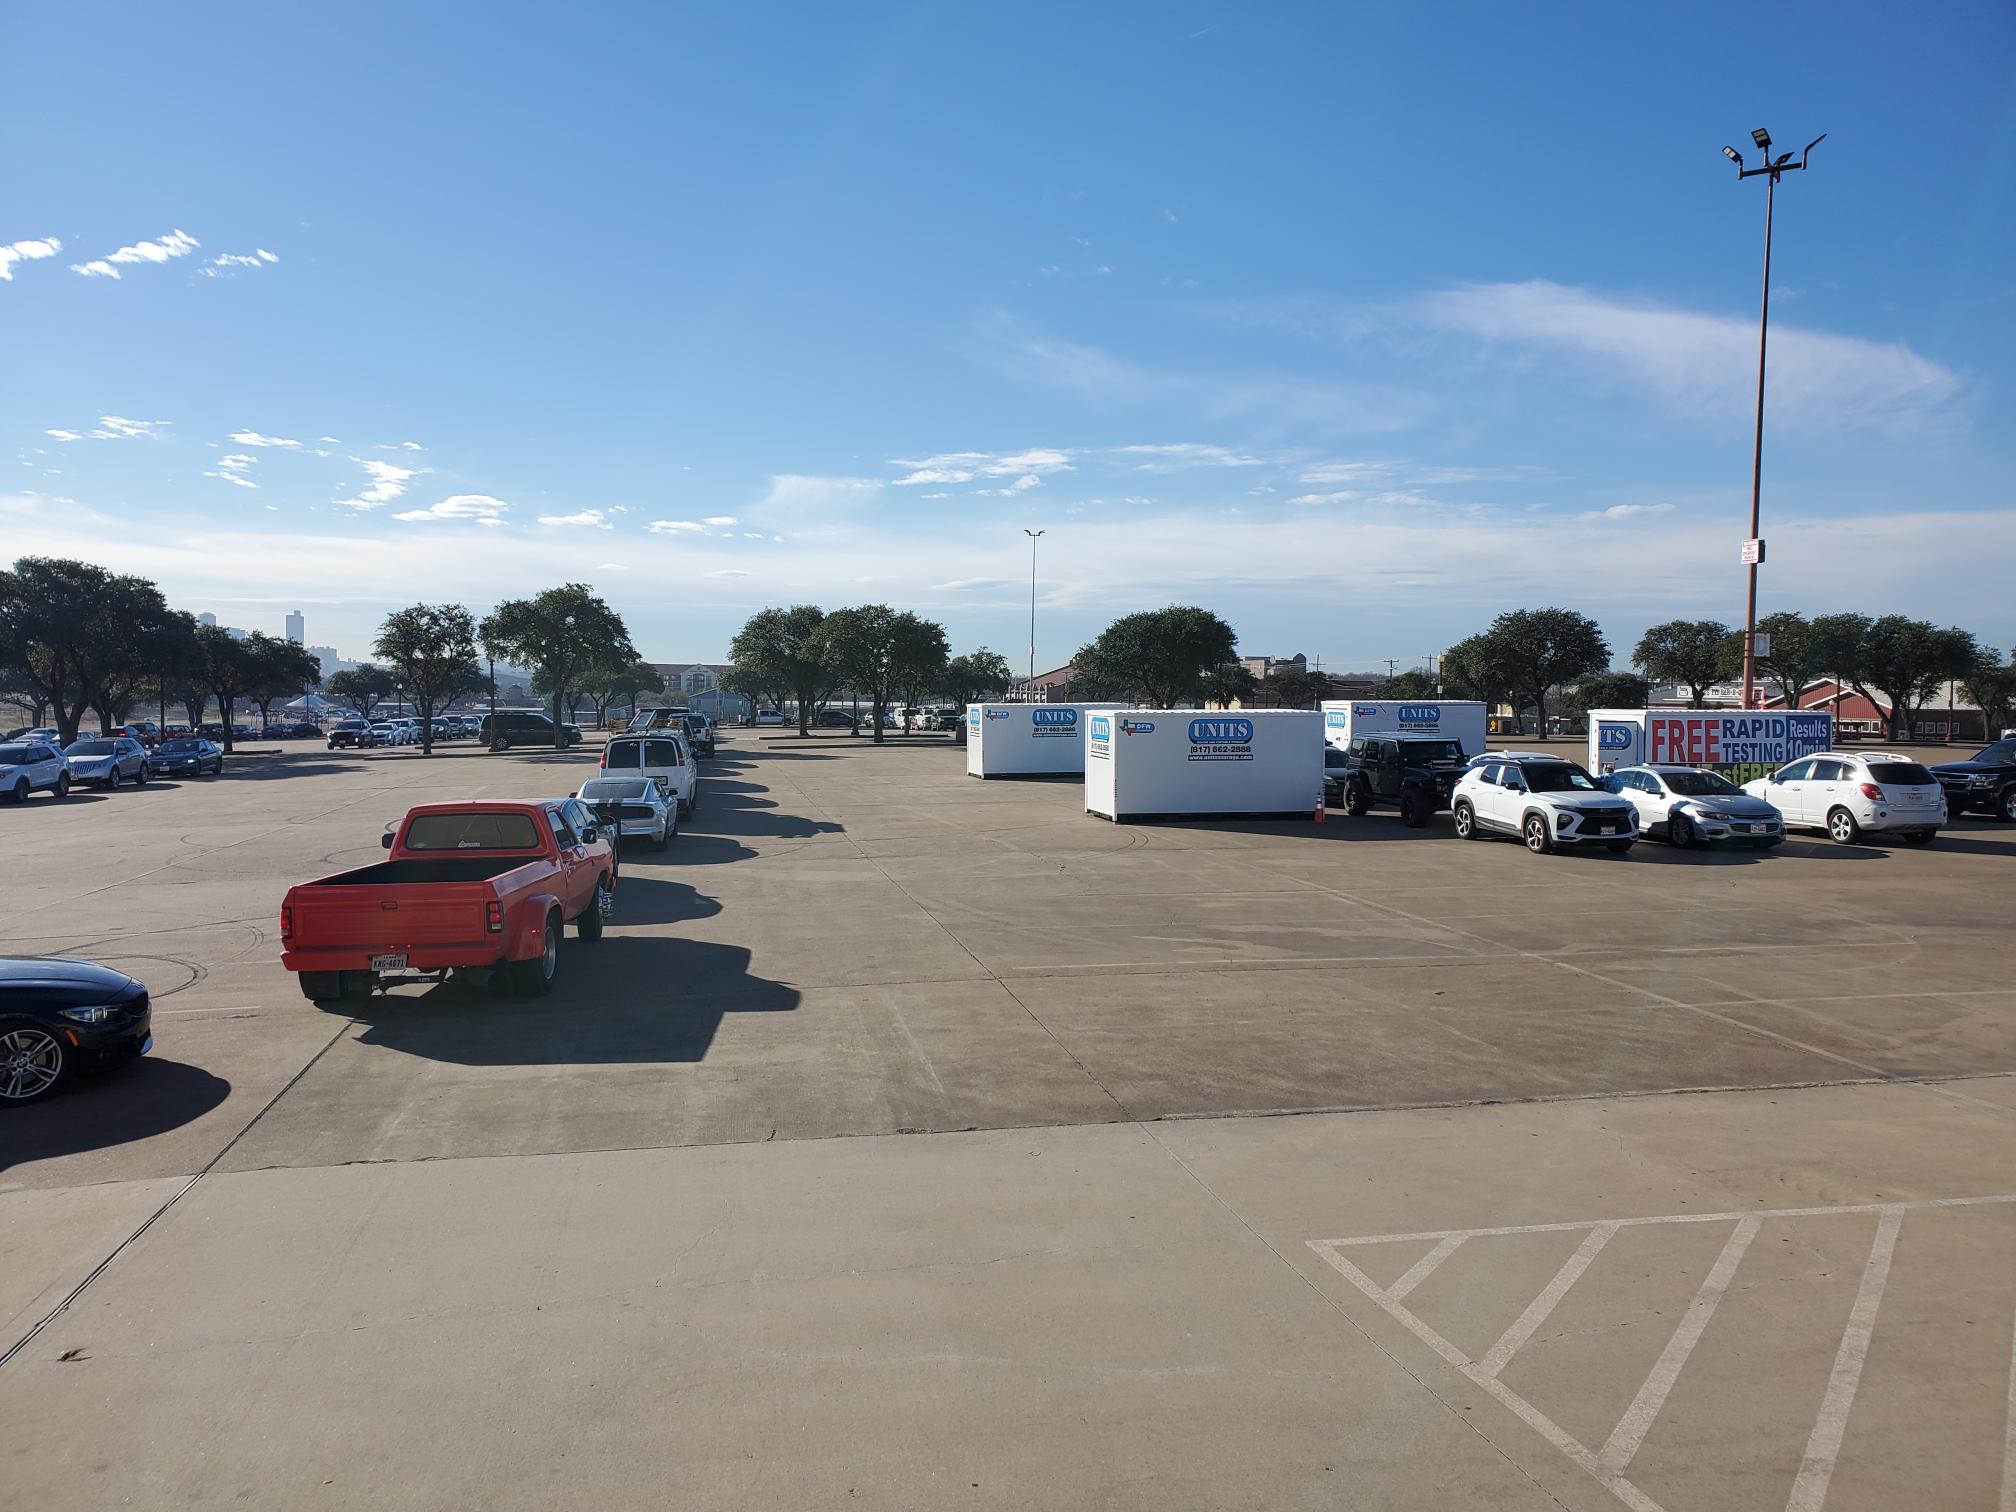 UNITS of Northwest DFW Delivers when it Comes to COVID- Testing